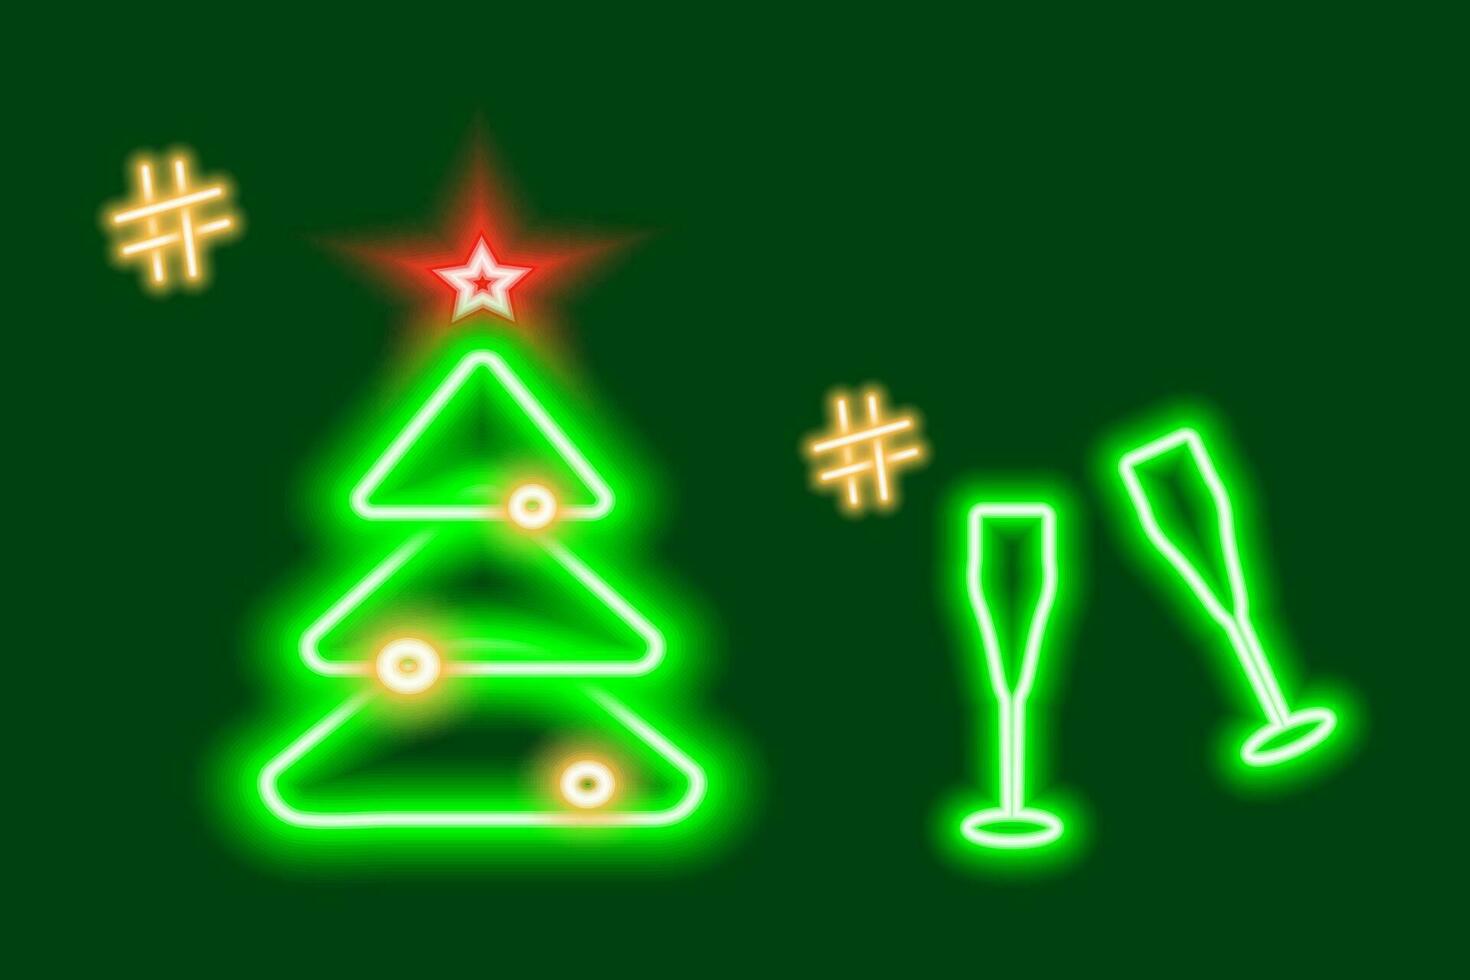 2 Neon glowing Christmas tree and wine glasses with hashtags. Concept for icons, search, greetings vector